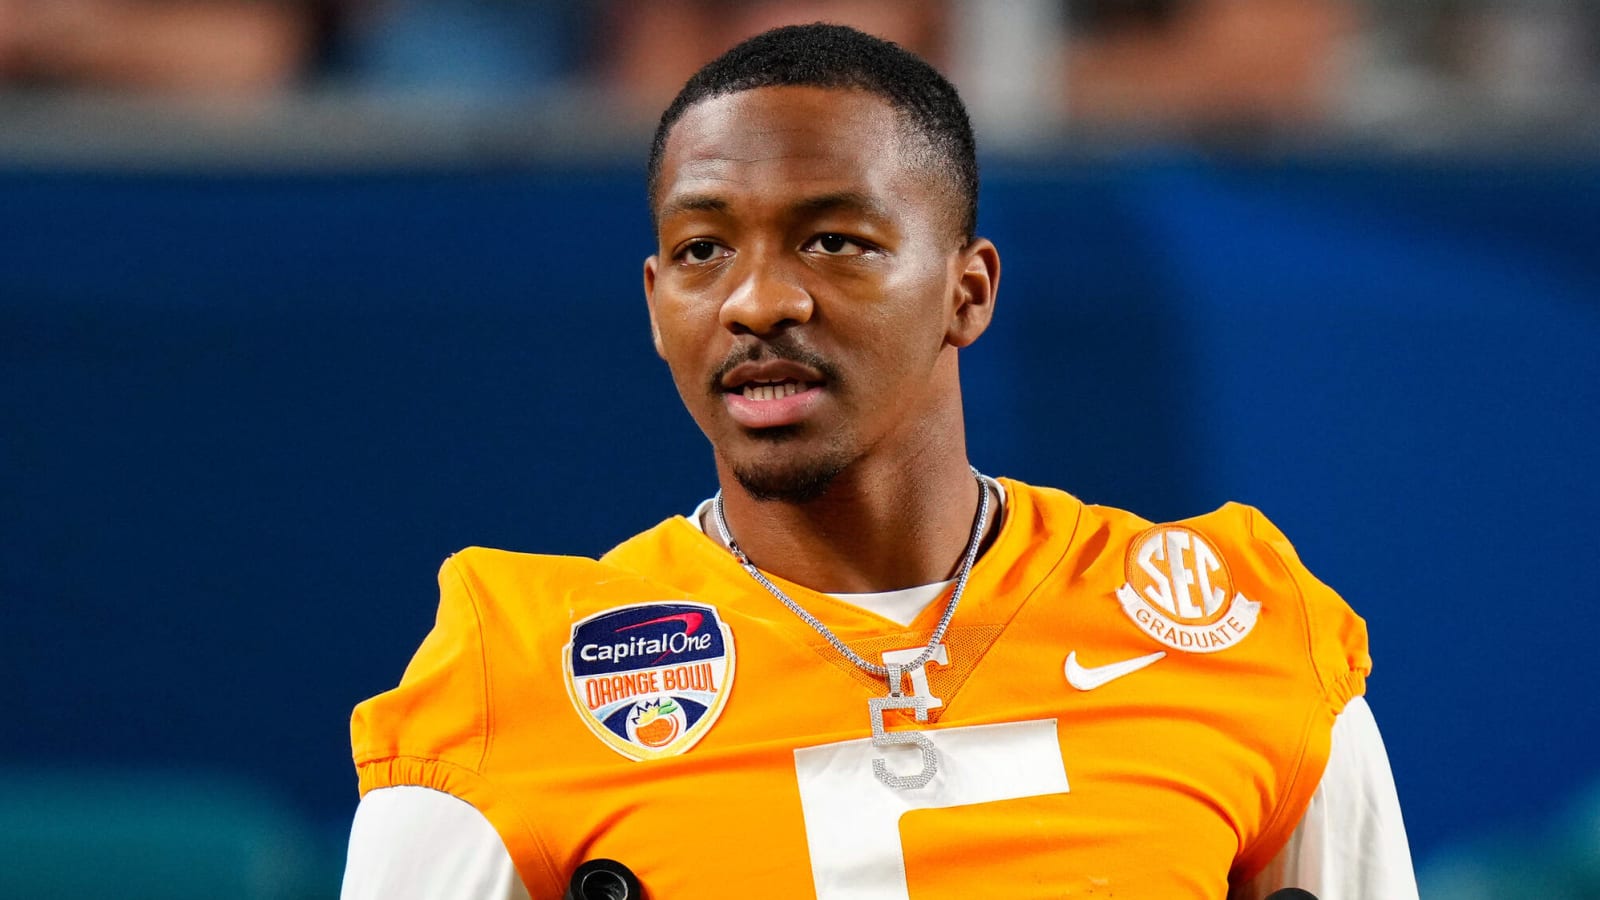 Is Tennessee QB Hendon Hooker a draft option for the Raiders?